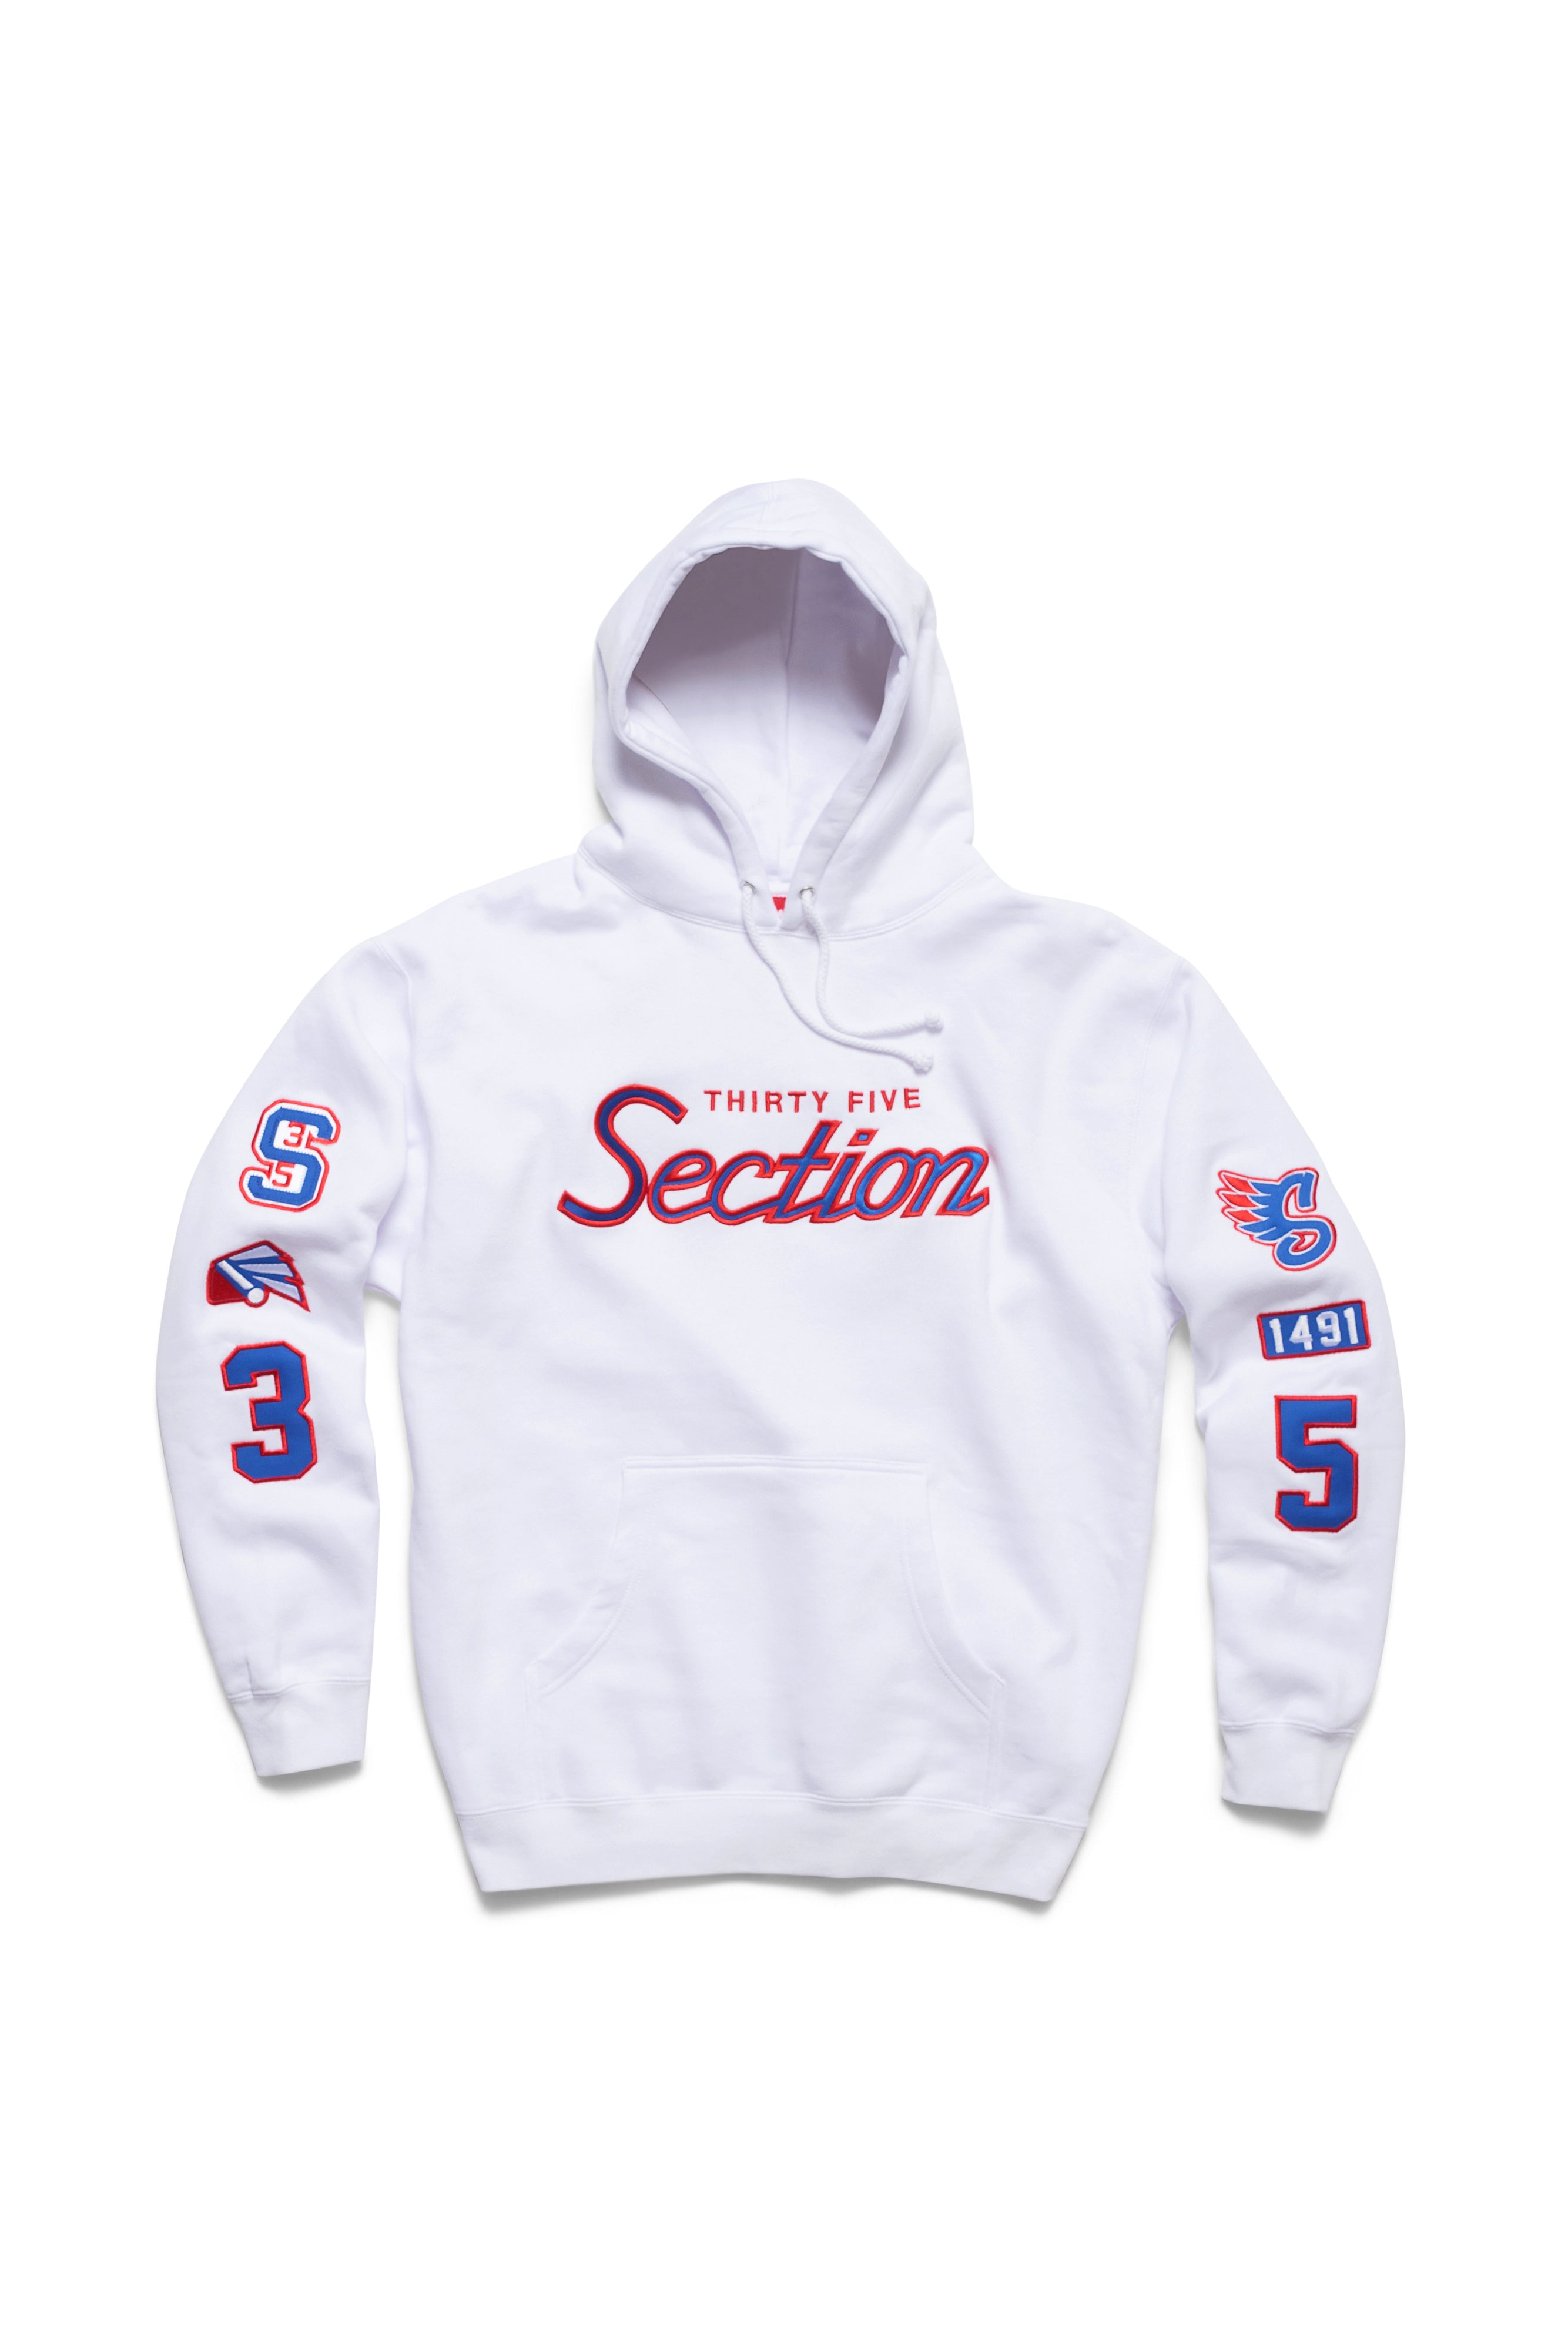 GOAT Patched Hoodie - White